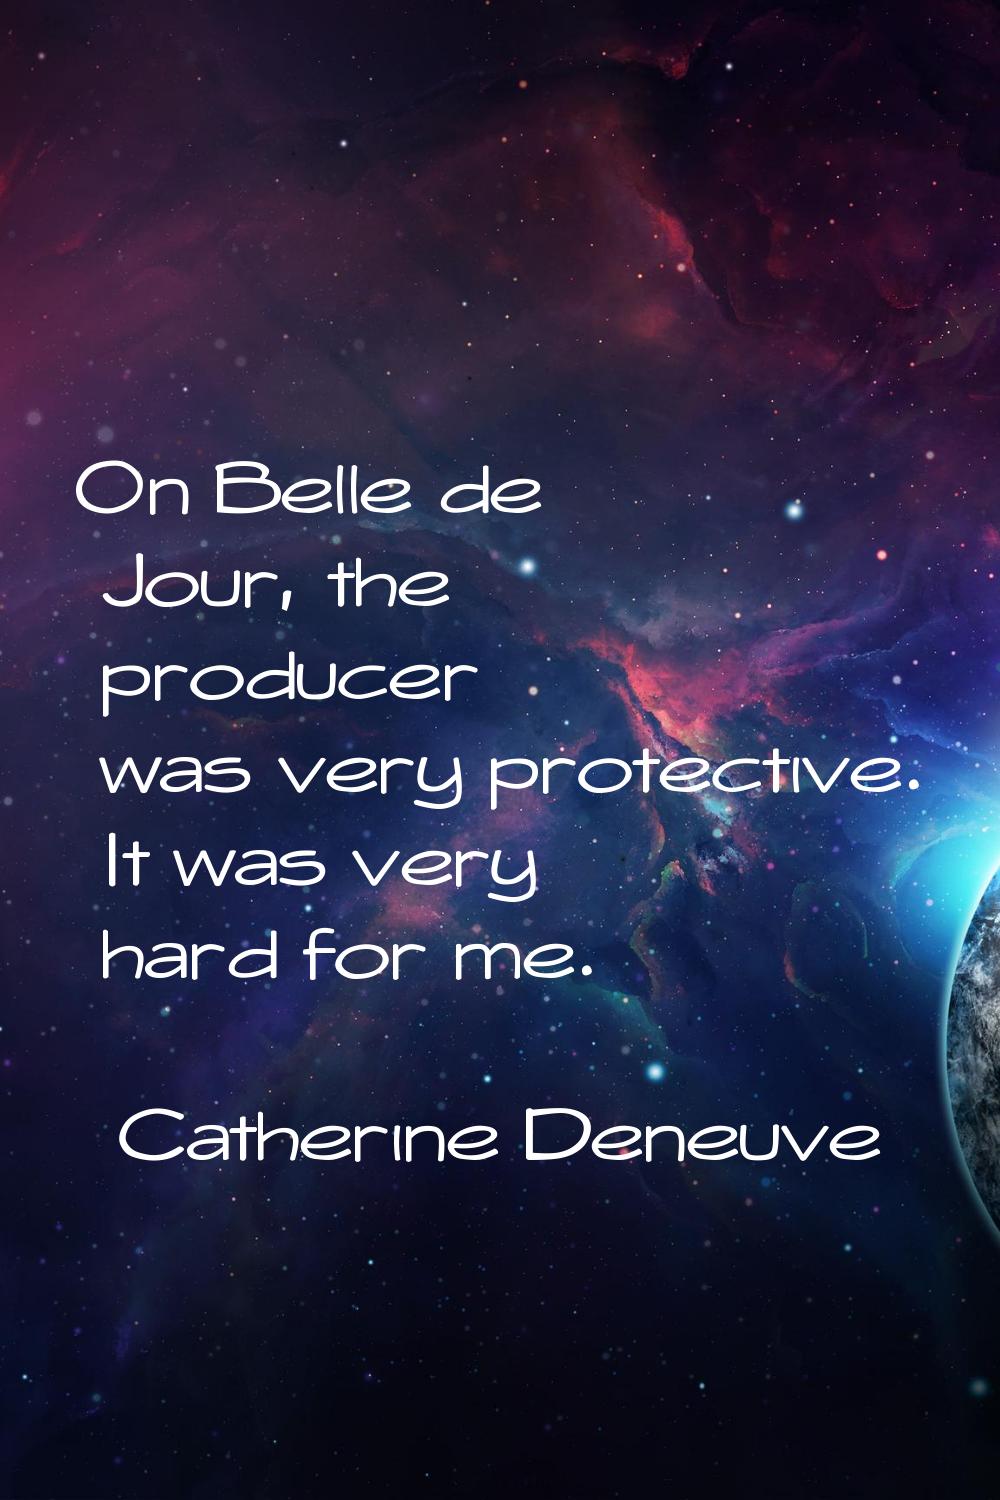 On Belle de Jour, the producer was very protective. It was very hard for me.